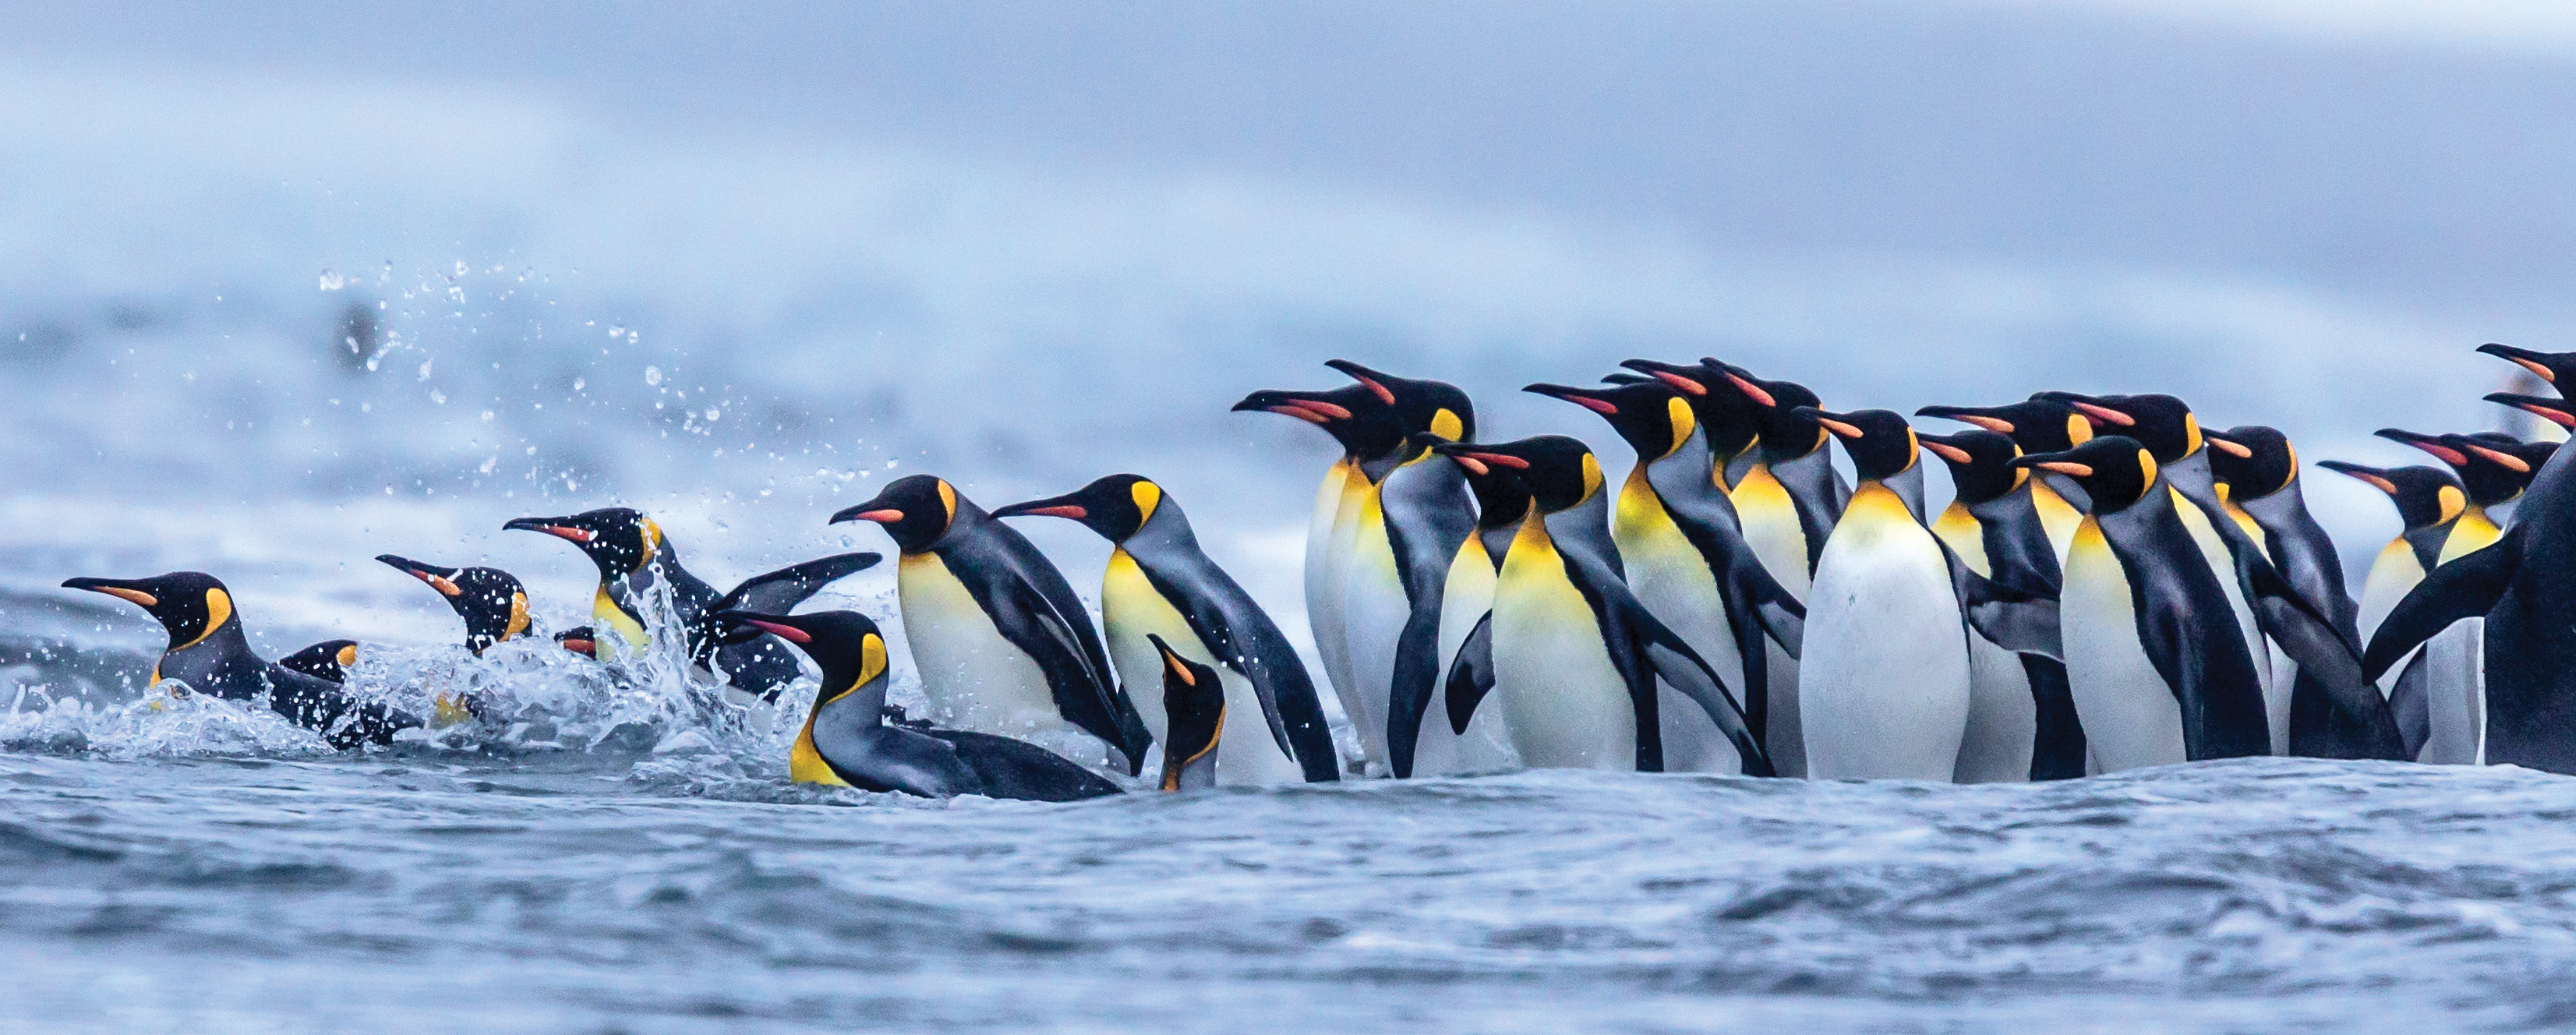 A line of penguins, some swimming, some still walking, enters the surf. The birds are white and black in color, with splashes of orange and yellow.